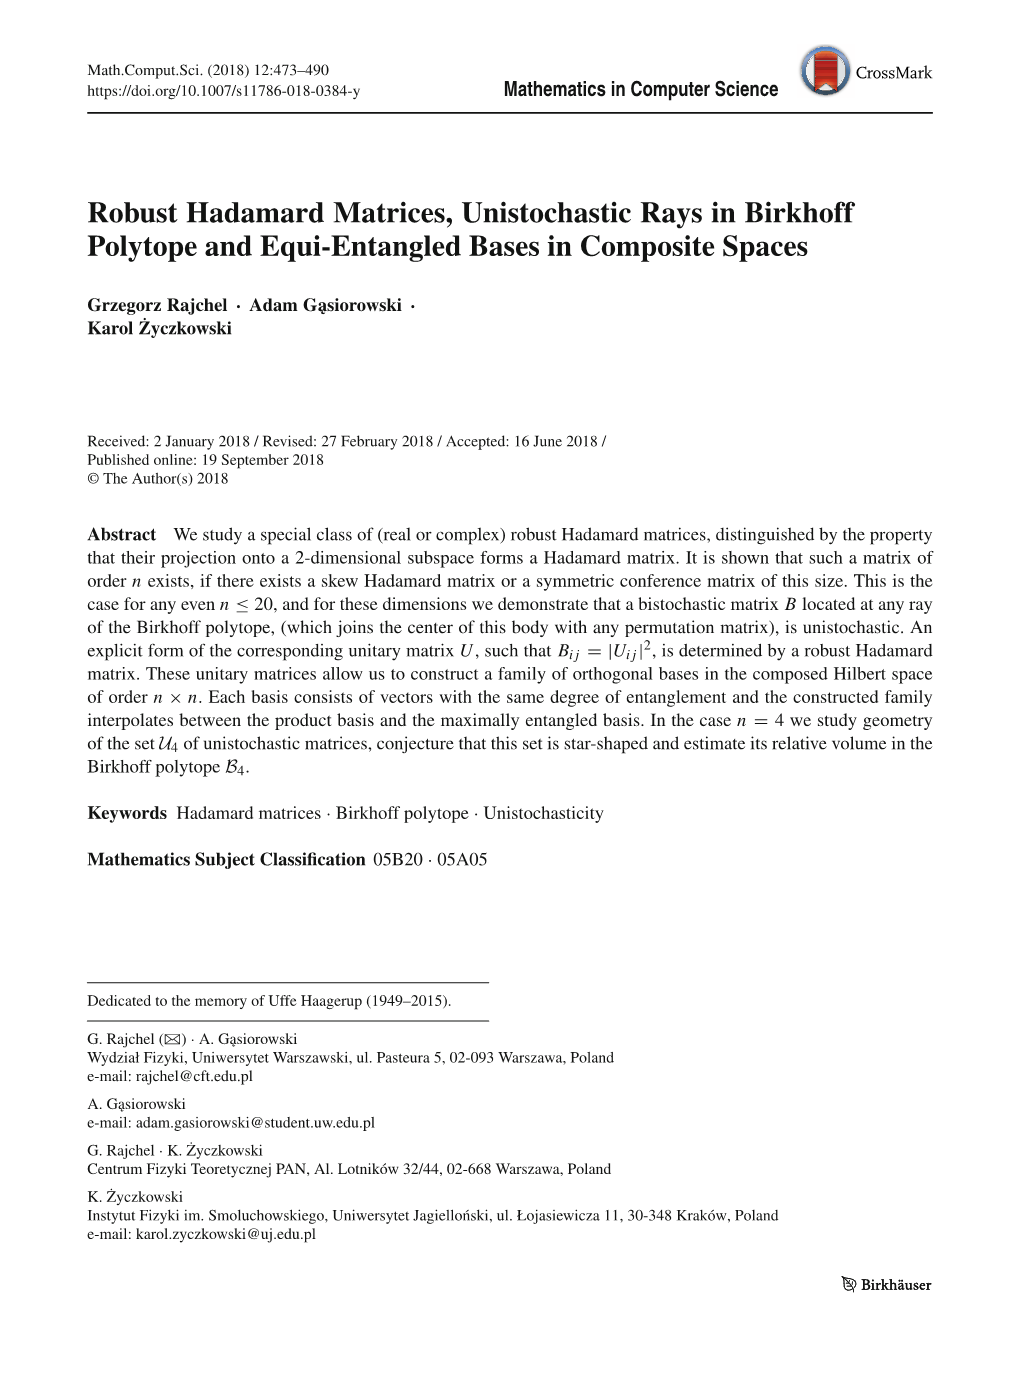 Robust Hadamard Matrices, Unistochastic Rays in Birkhoff Polytope and Equi-Entangled Bases in Composite Spaces